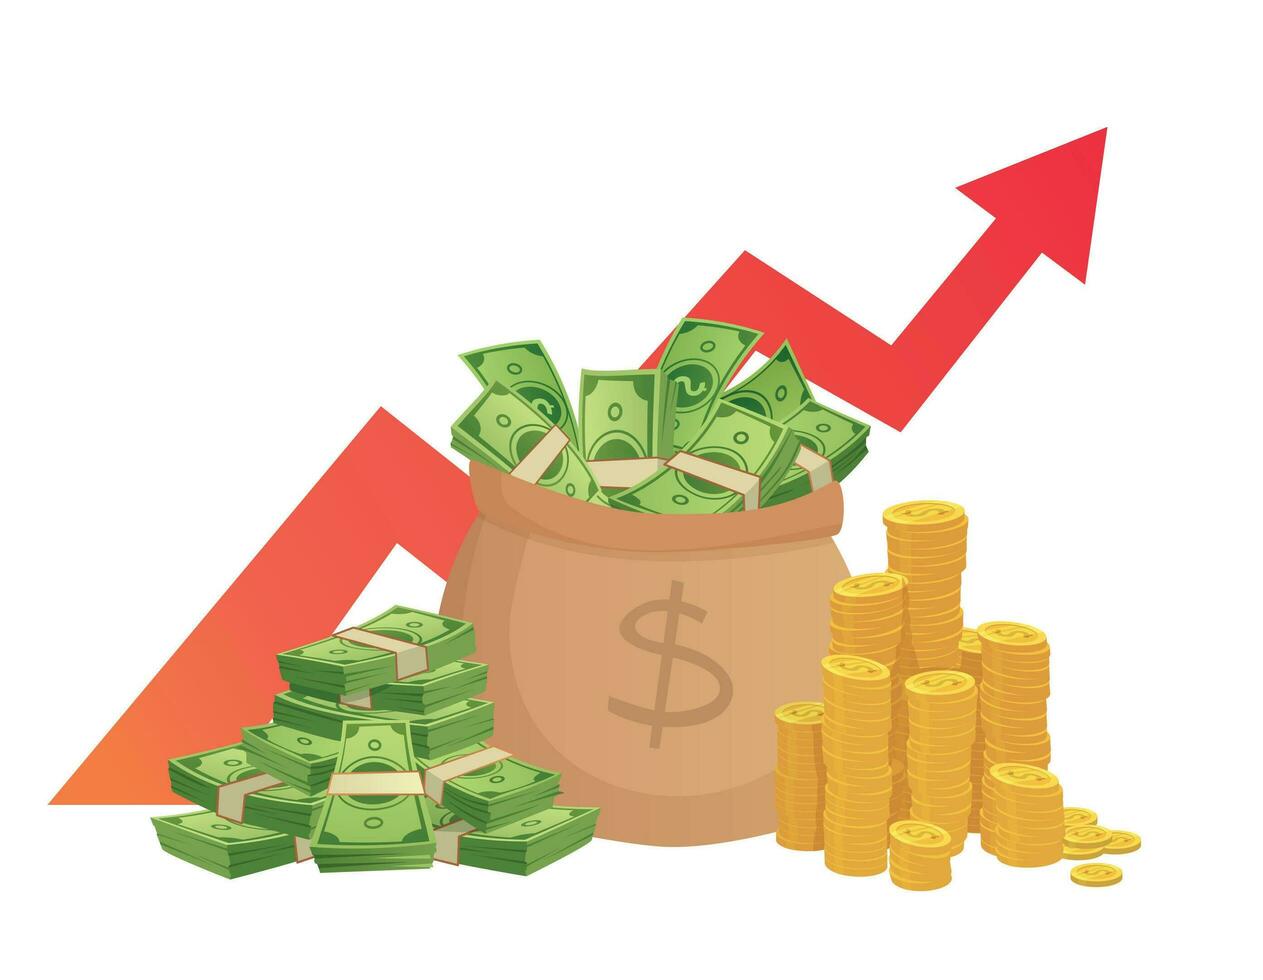 Cartoon savings value growth. Money profit increase, profitable investments chart with red graph arrow and cash pile vector illustration